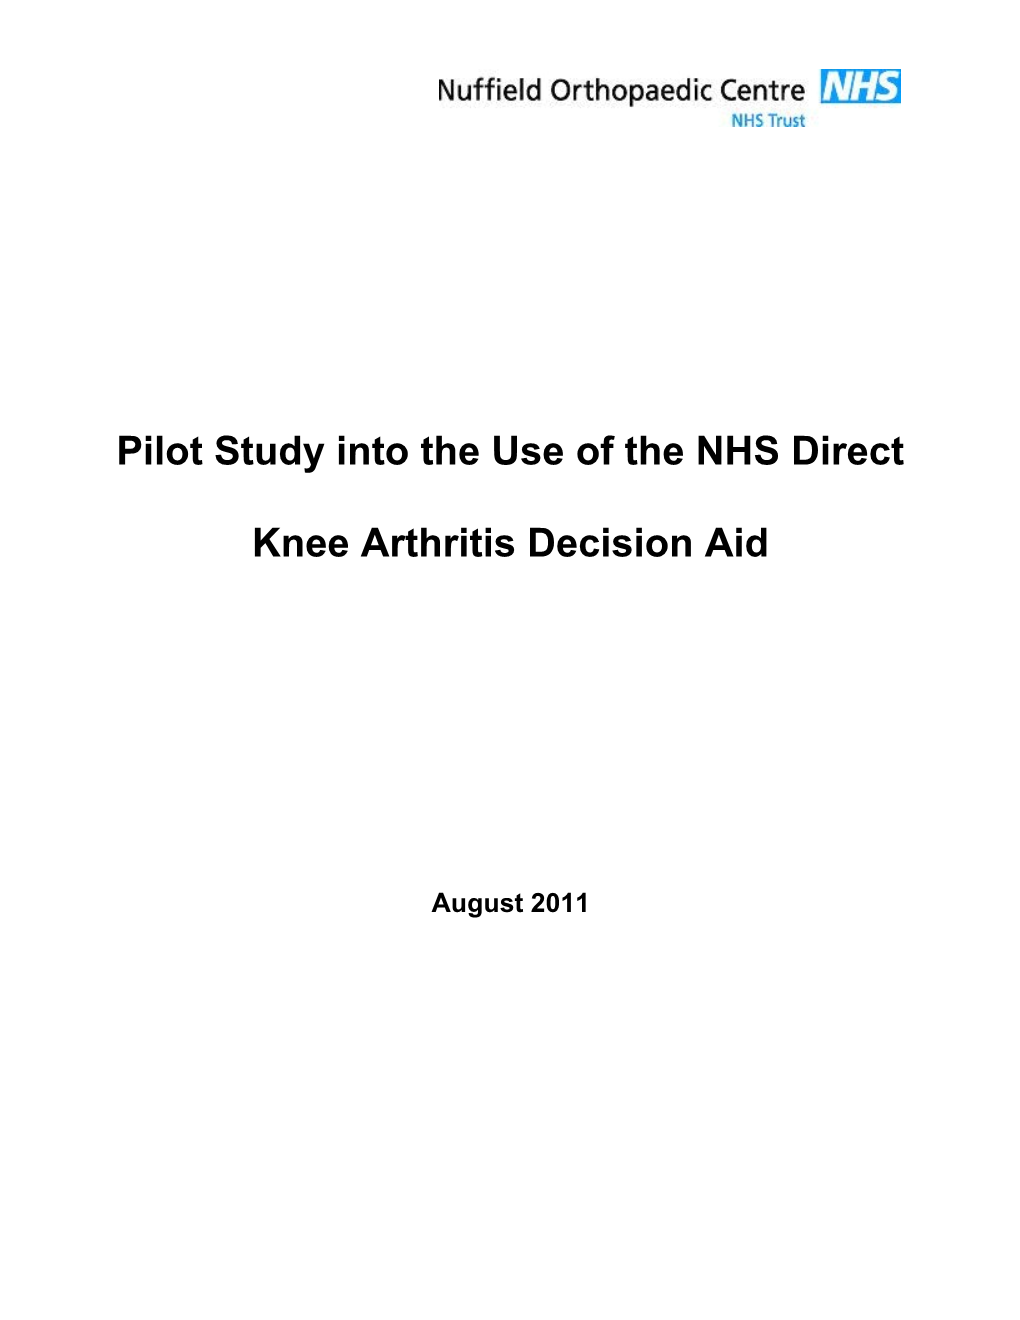 Pilot Study Into the Use of the NHS Direct Knee Arthritis Decision Aid